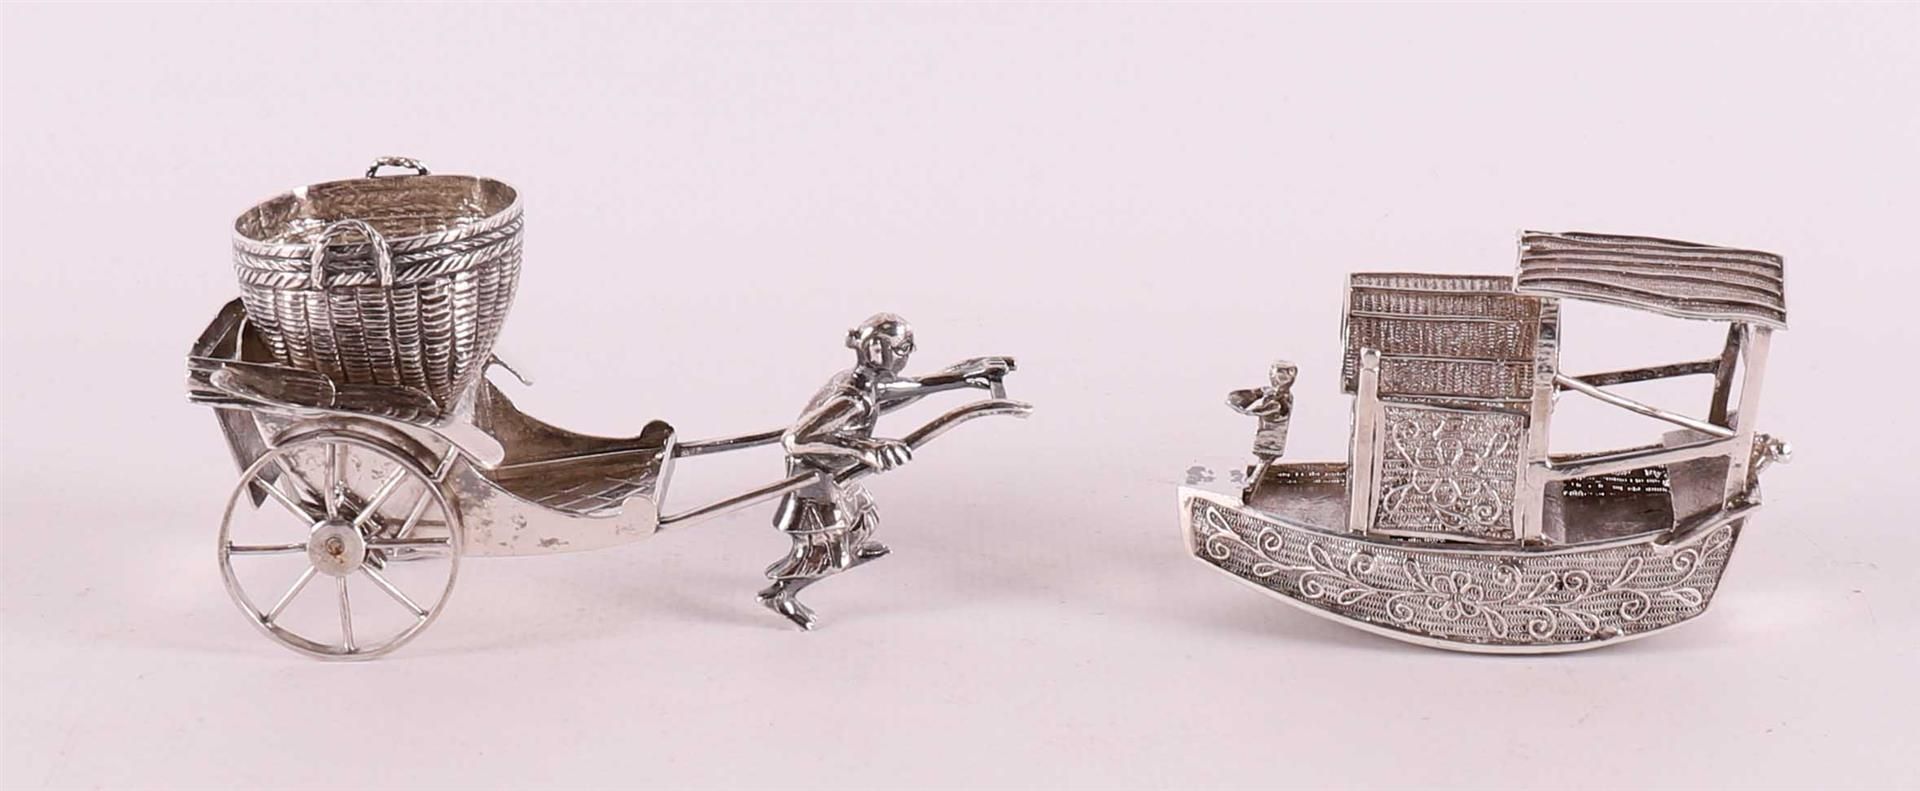 Etagere silver. A rickshaw with basket + boat, Indonesia, 20th century.